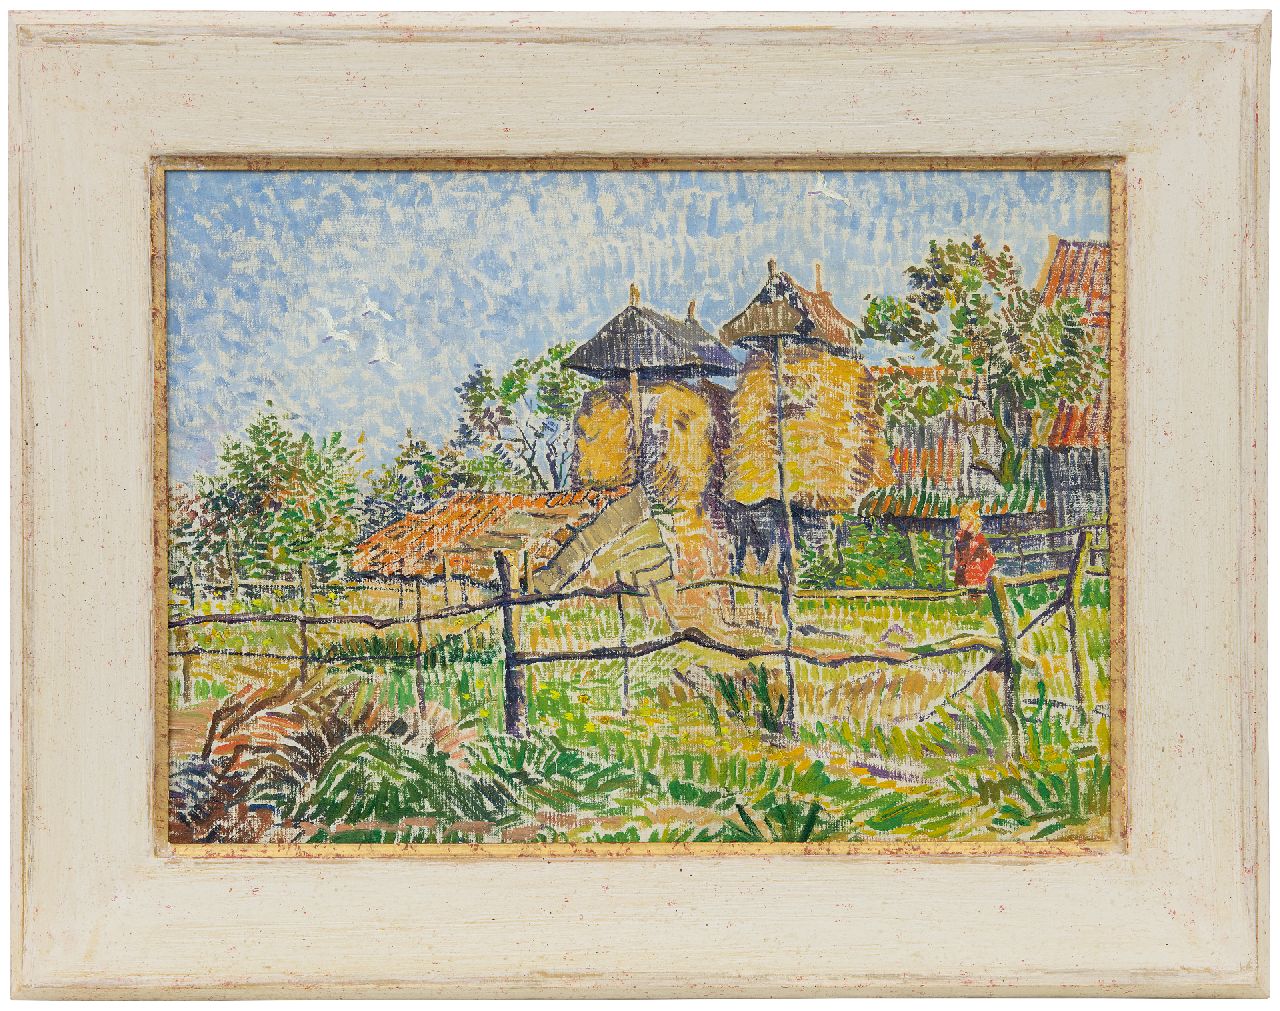 Pijpers E.E.  | 'Edith' Elizabeth Pijpers | Paintings offered for sale | A sunny farmyard, oil on canvas 36.8 x 51.9 cm